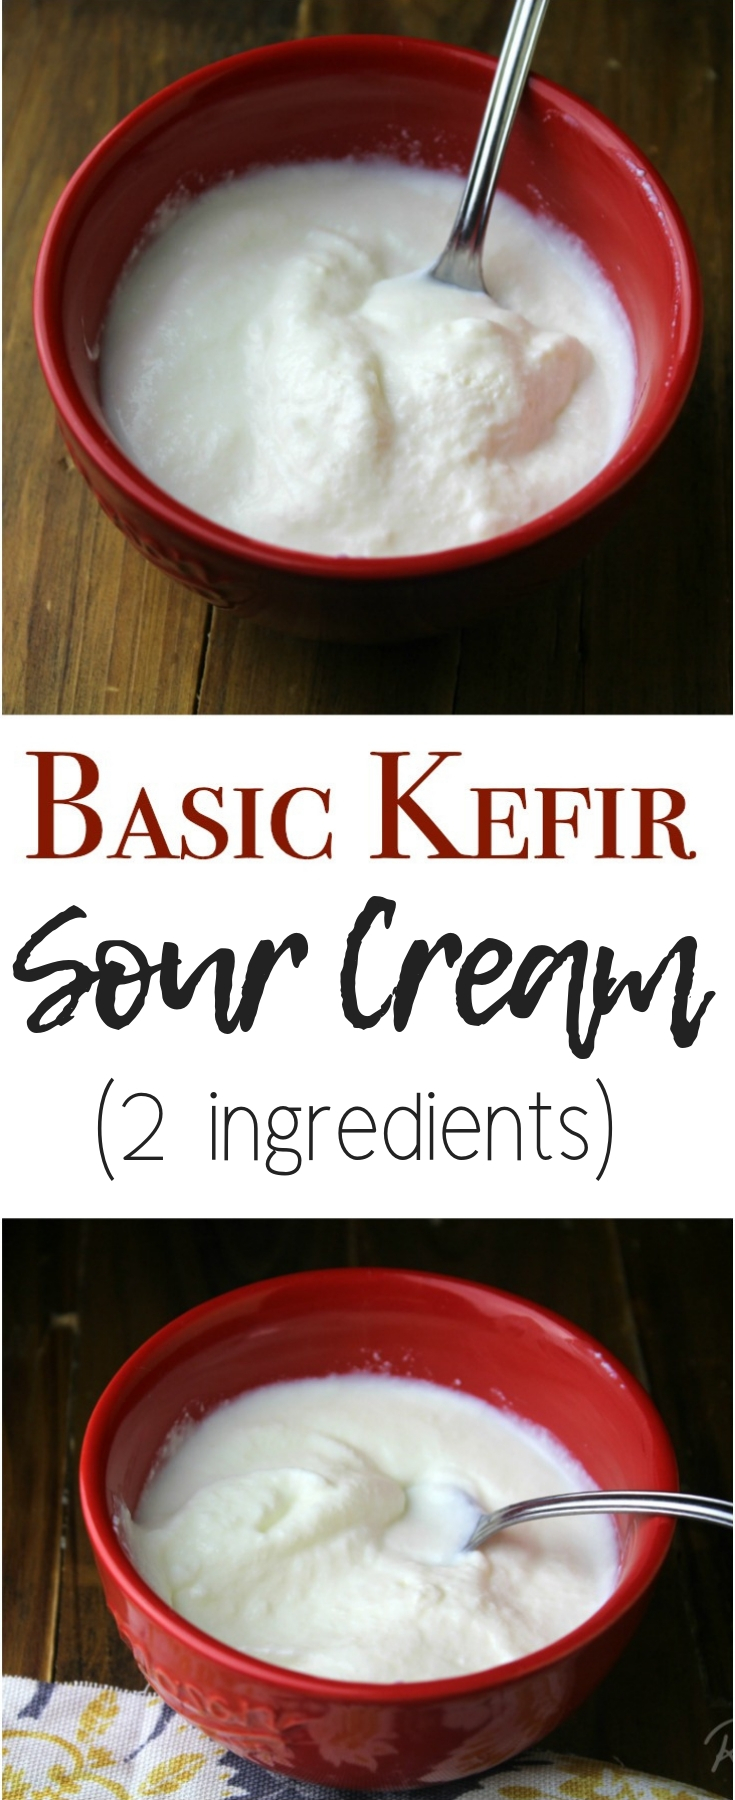 Basic kefir sour cream is rich in flavor & probiotics - a great alternative to store-bought sour cream! It’s easy to make with 2 simple ingredients.